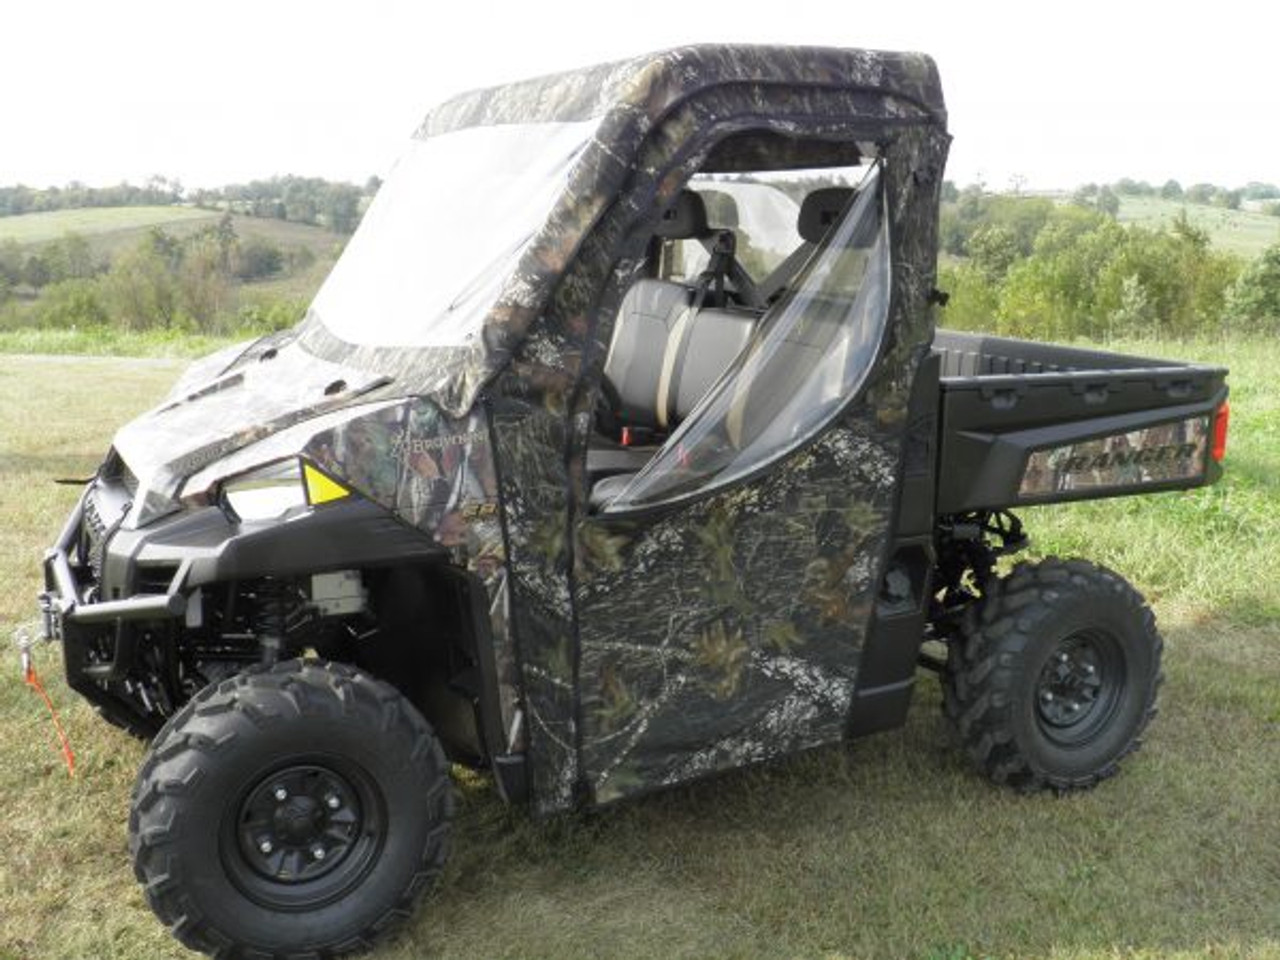 3 Star side x side Polaris Ranger XP900 570 XP570 XP1000 1000 soft full cab enclosure with vinyl windshield side angle view